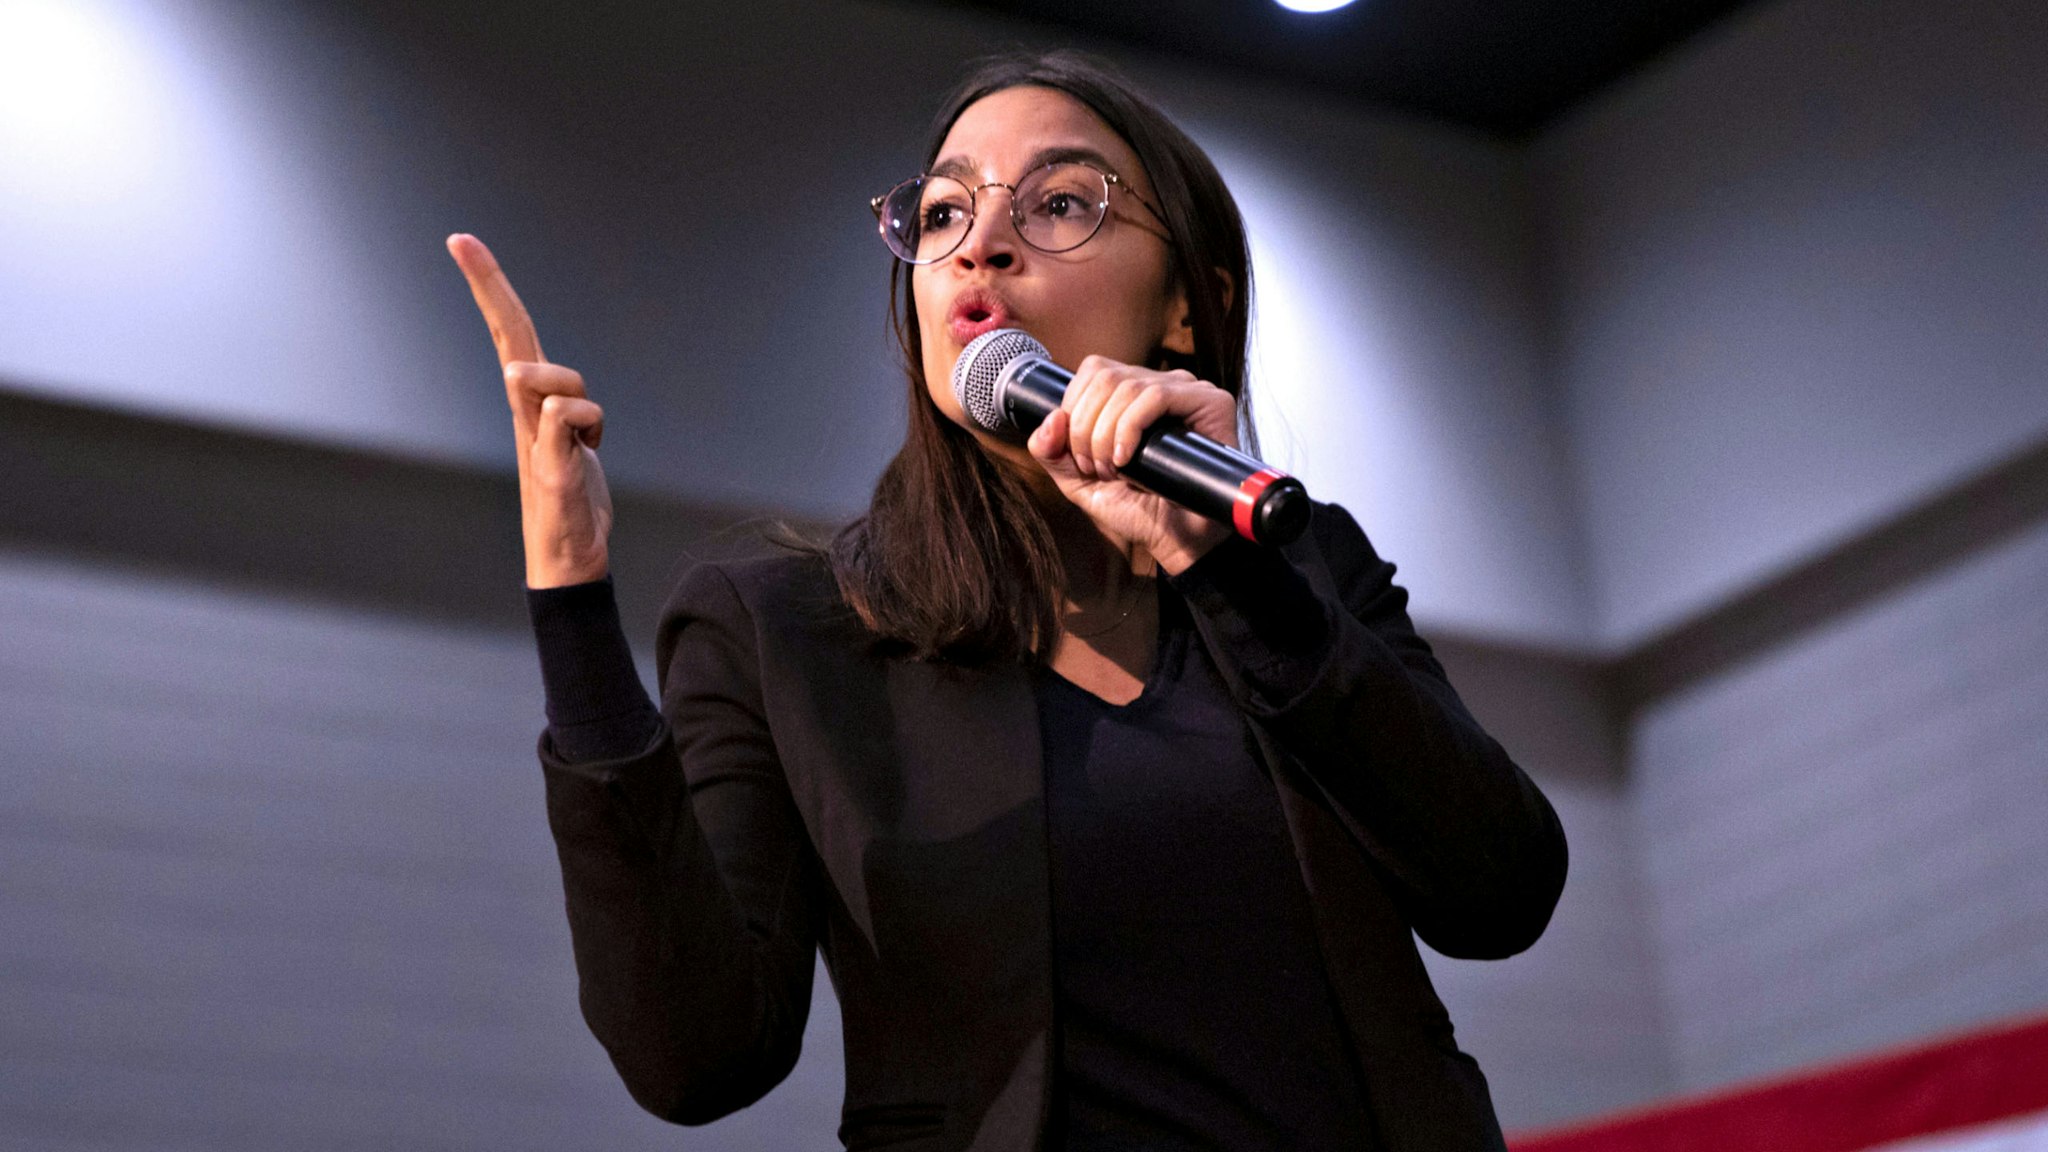 U.S. Representative Alexandria Ocasio-Cortez, a Democrat from New York, speaks during a campaign rally for Senator Bernie Sanders, an Independent from Vermont and 2020 presidential candidate, not pictured, in Sioux City, Iowa, U.S., on Sunday, Jan. 26, 2020. New polls showed the unsettled state of the Democratic primary days before the first voters weigh in at the Iowa caucuses, with front-runner status still unclear.